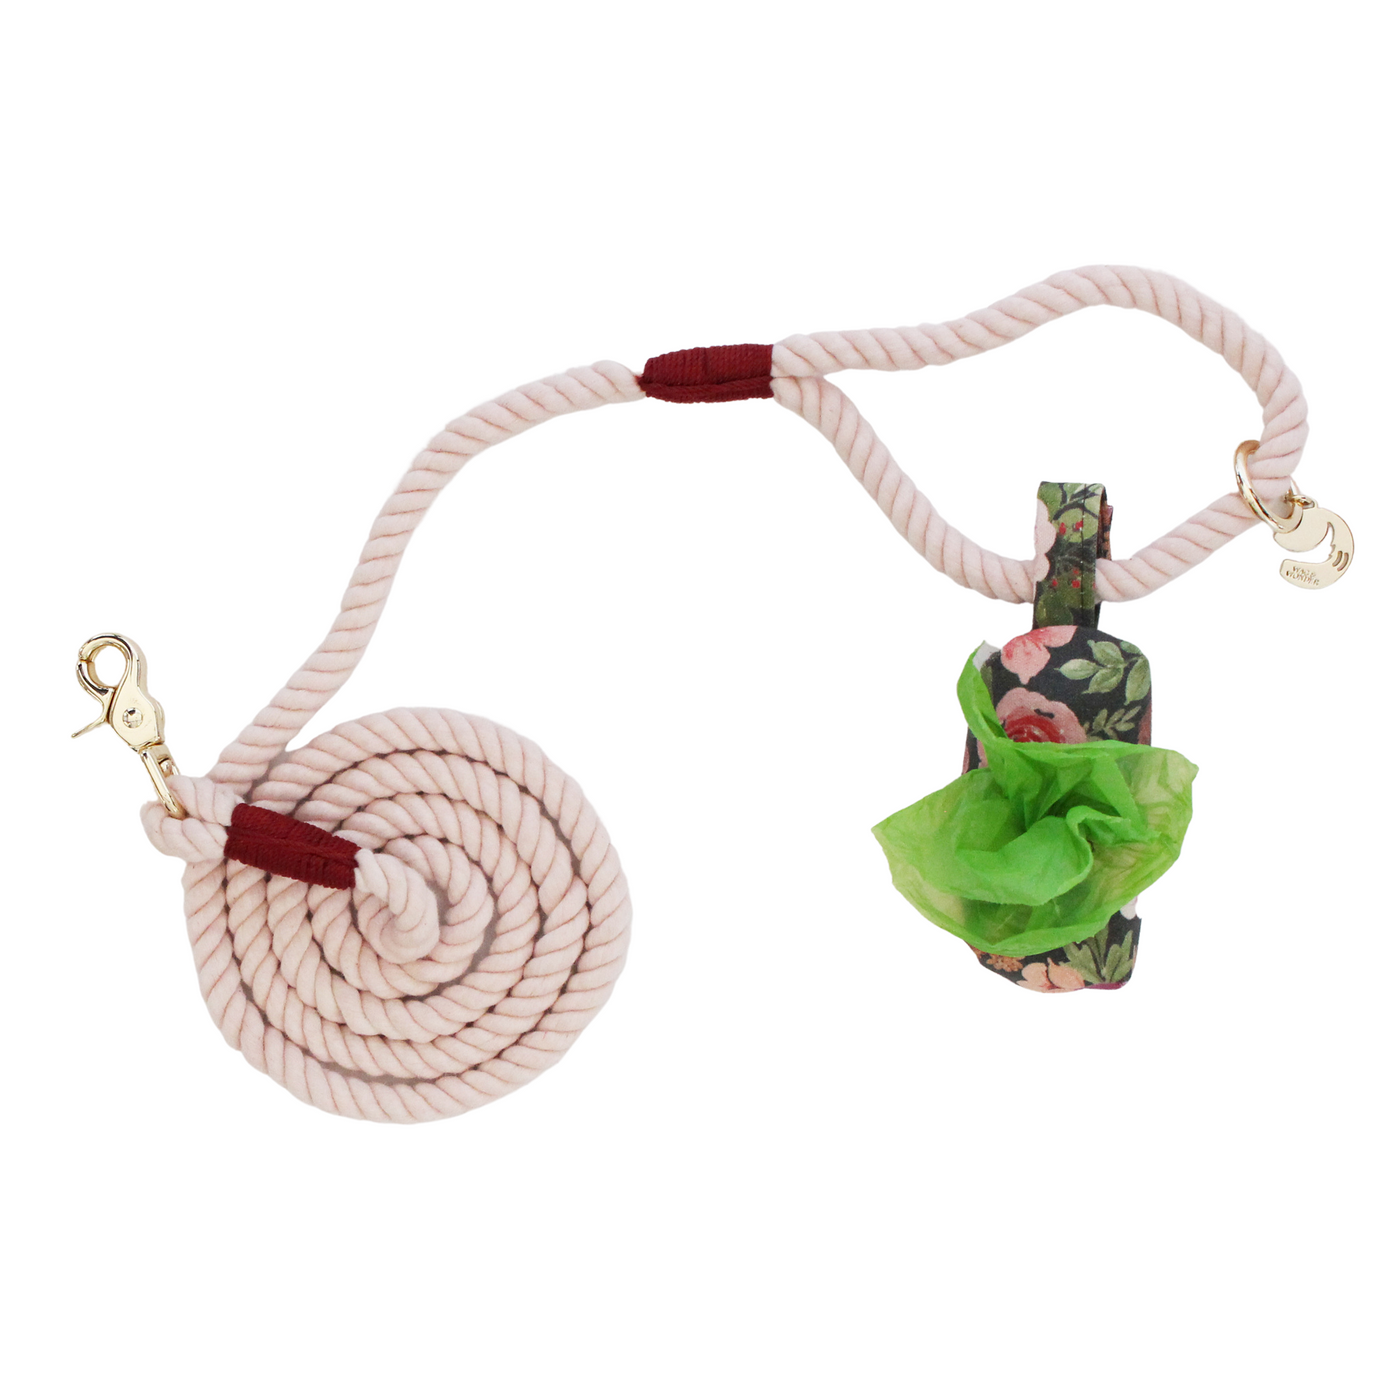 Soft Berry Rope Dog Leash + Mulberry Bouquet Waste Bag Holder